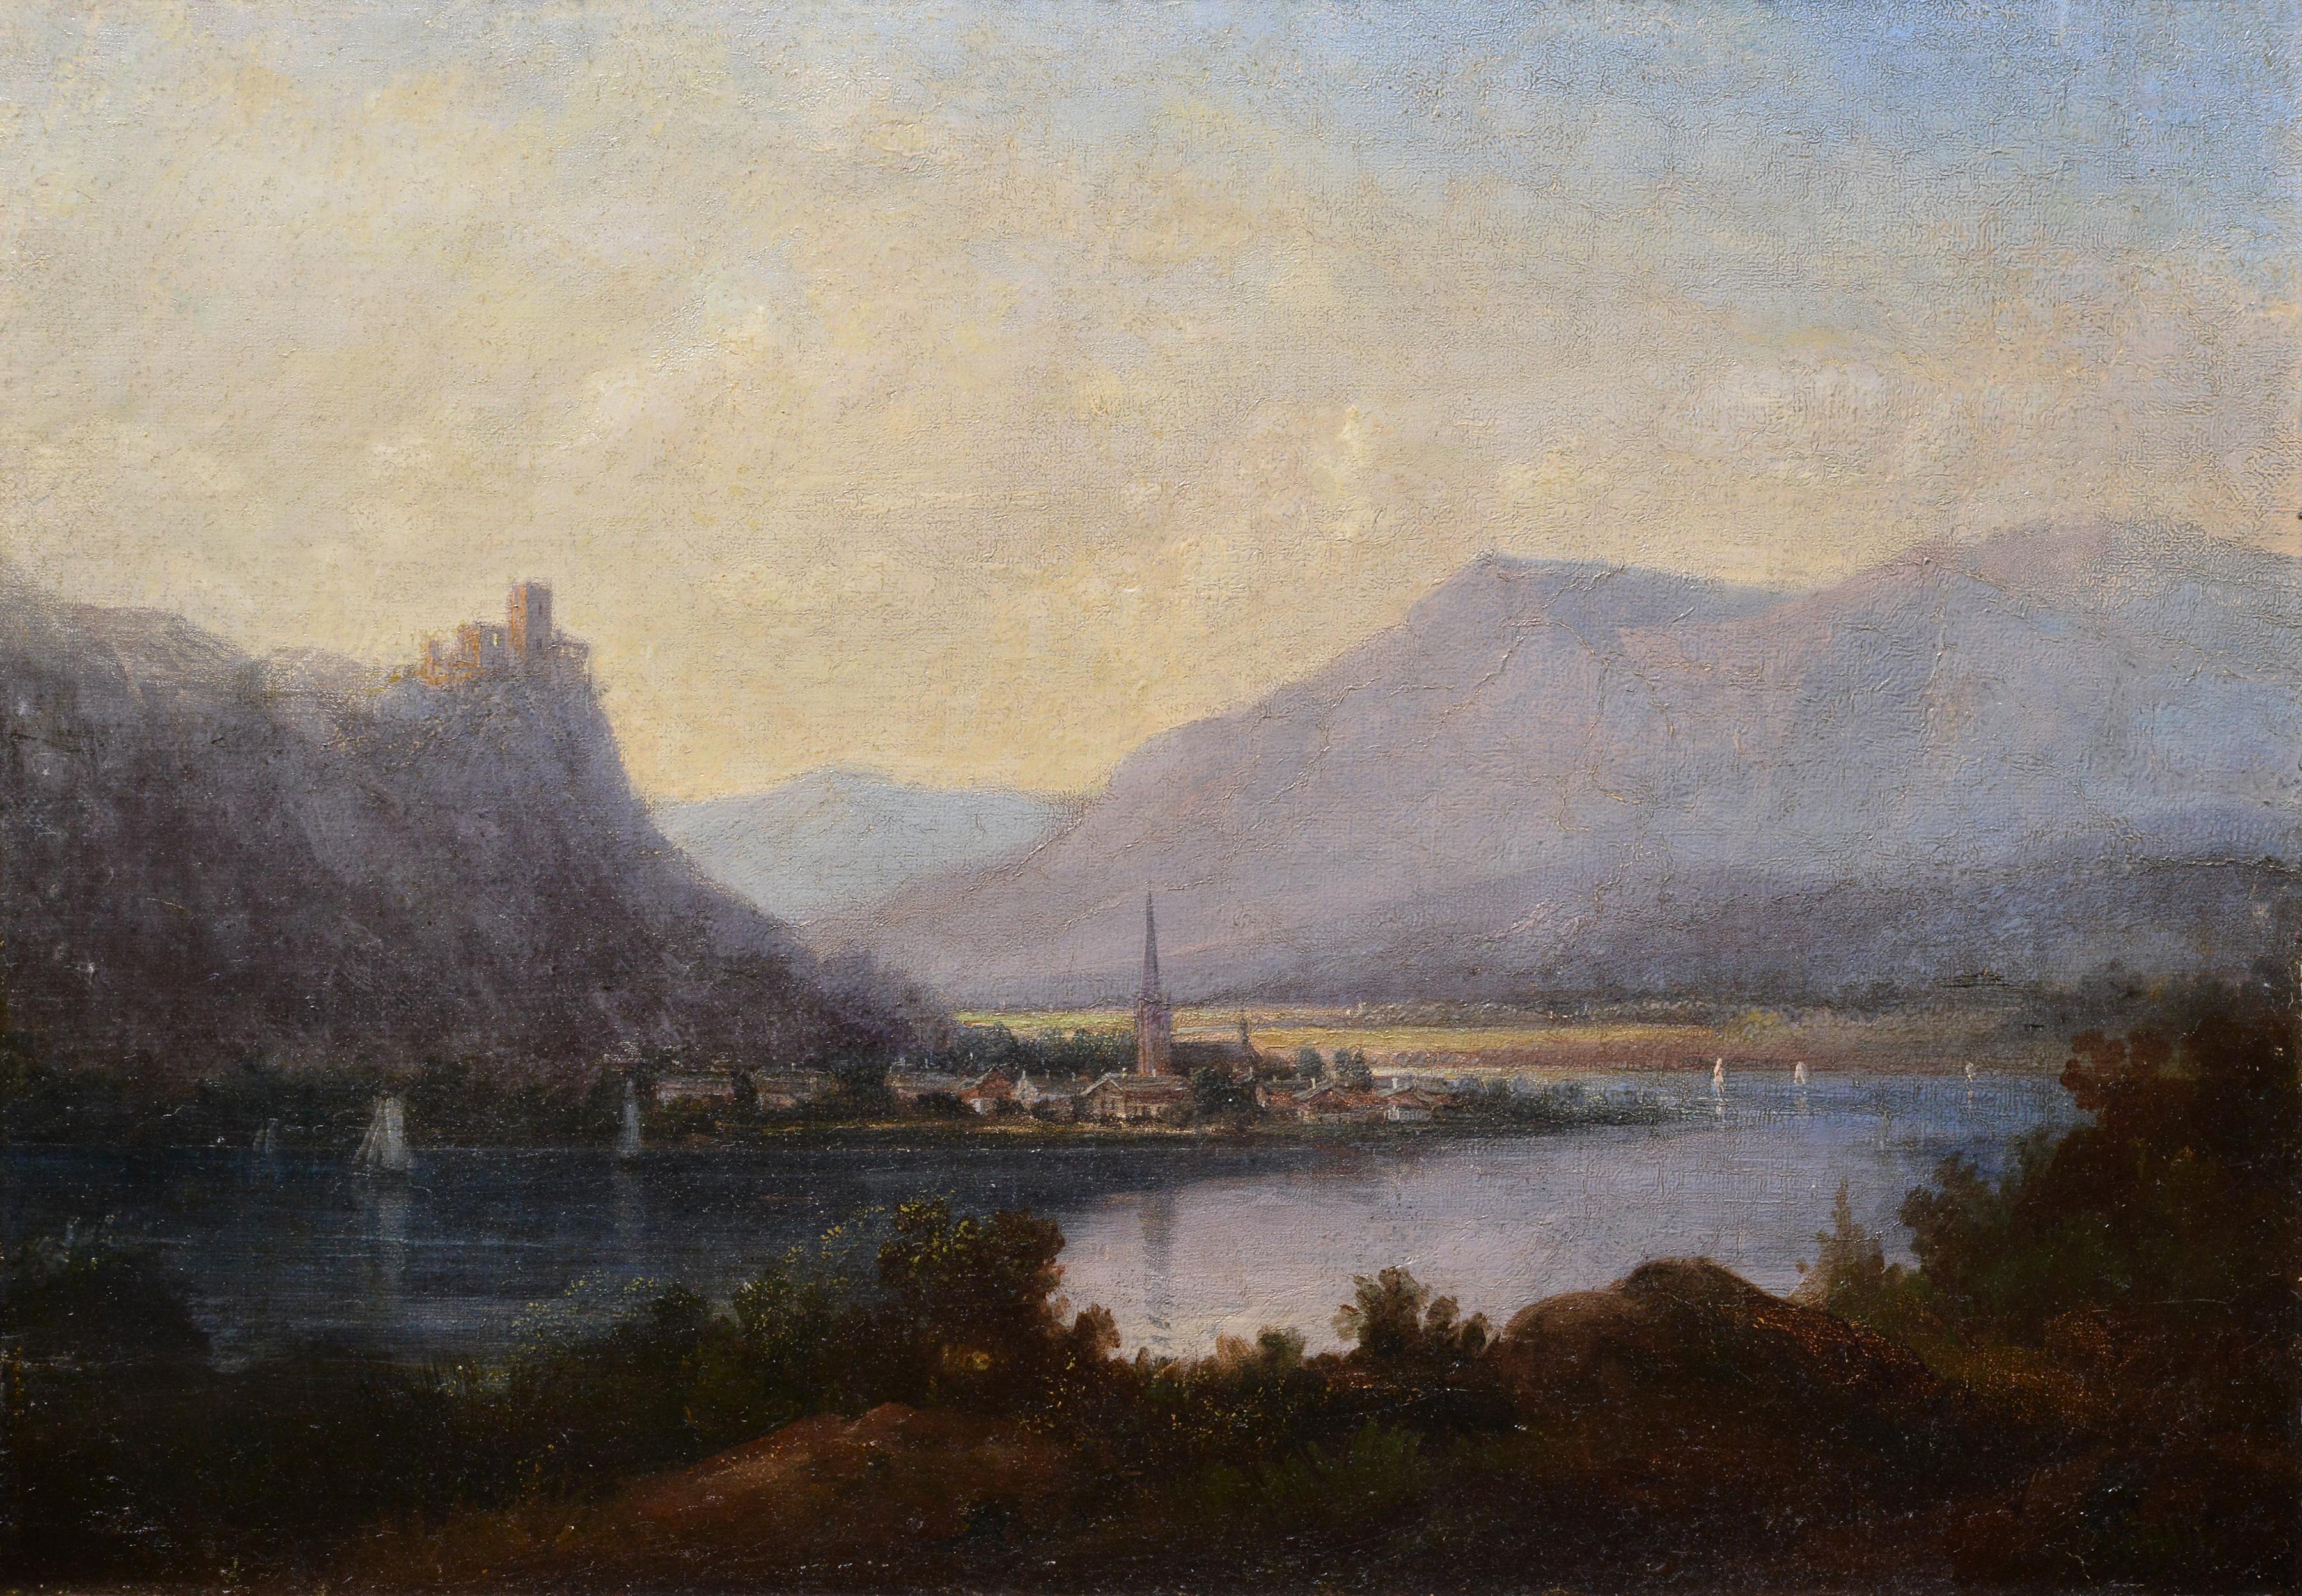 Alpine Valley Landscape with Castle on Rock and Town at River Bend 19th Century - Painting by Unknown